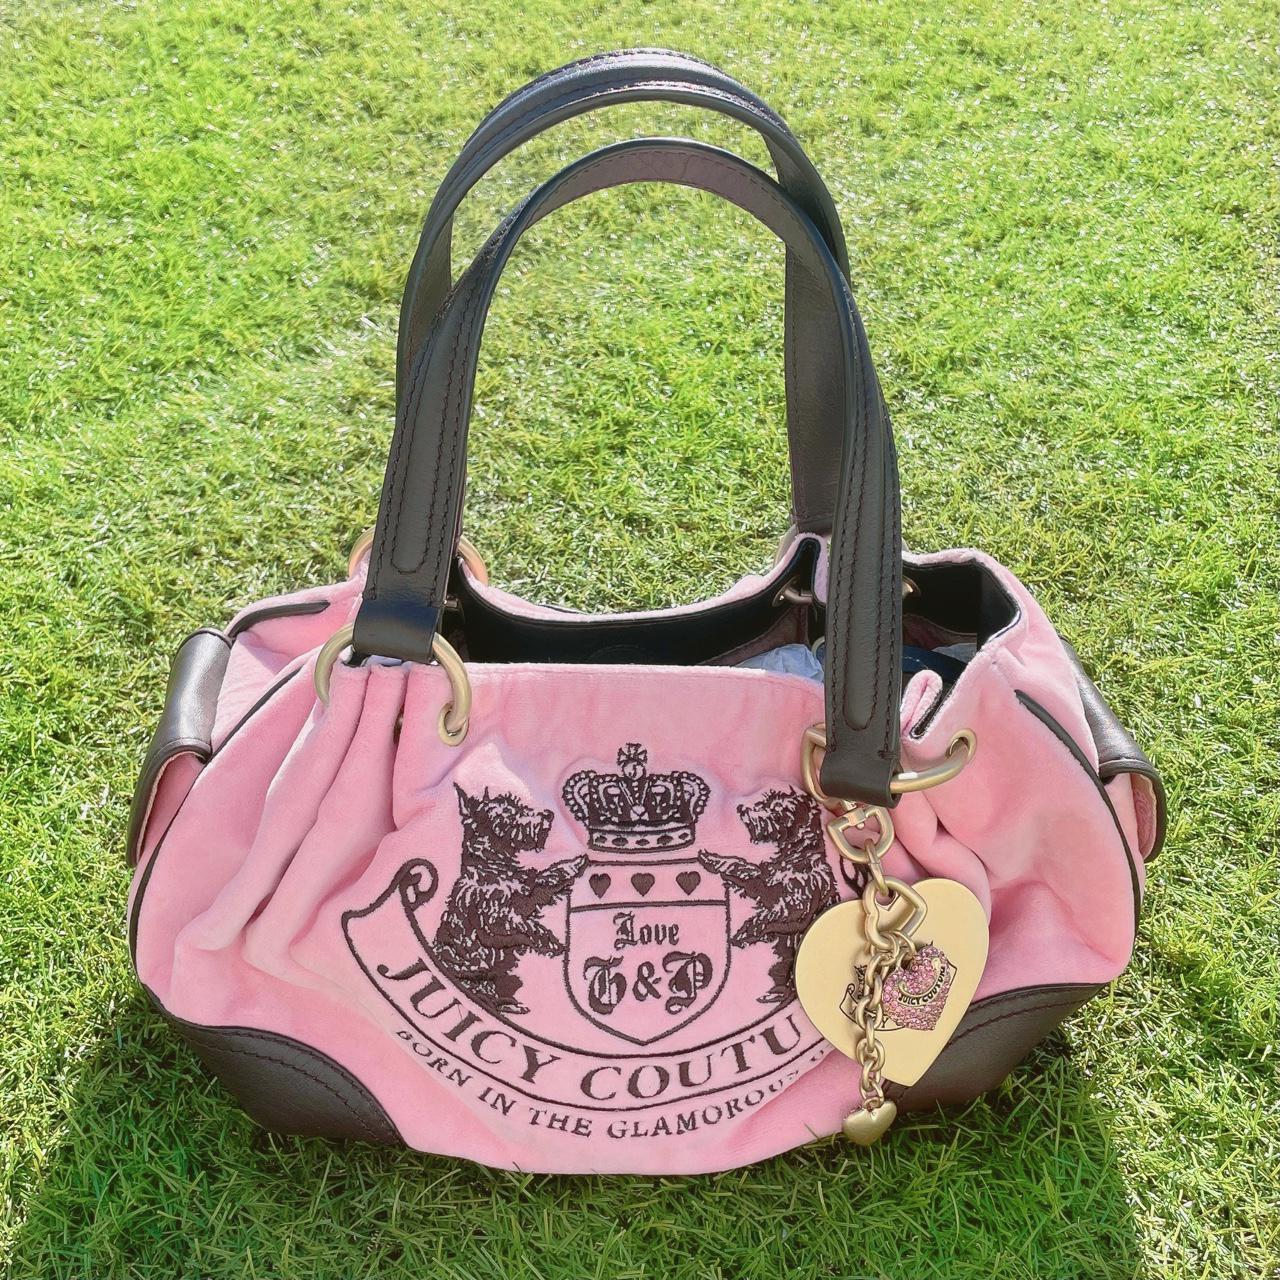 Juicy Couture Women's Pink and Brown Bag